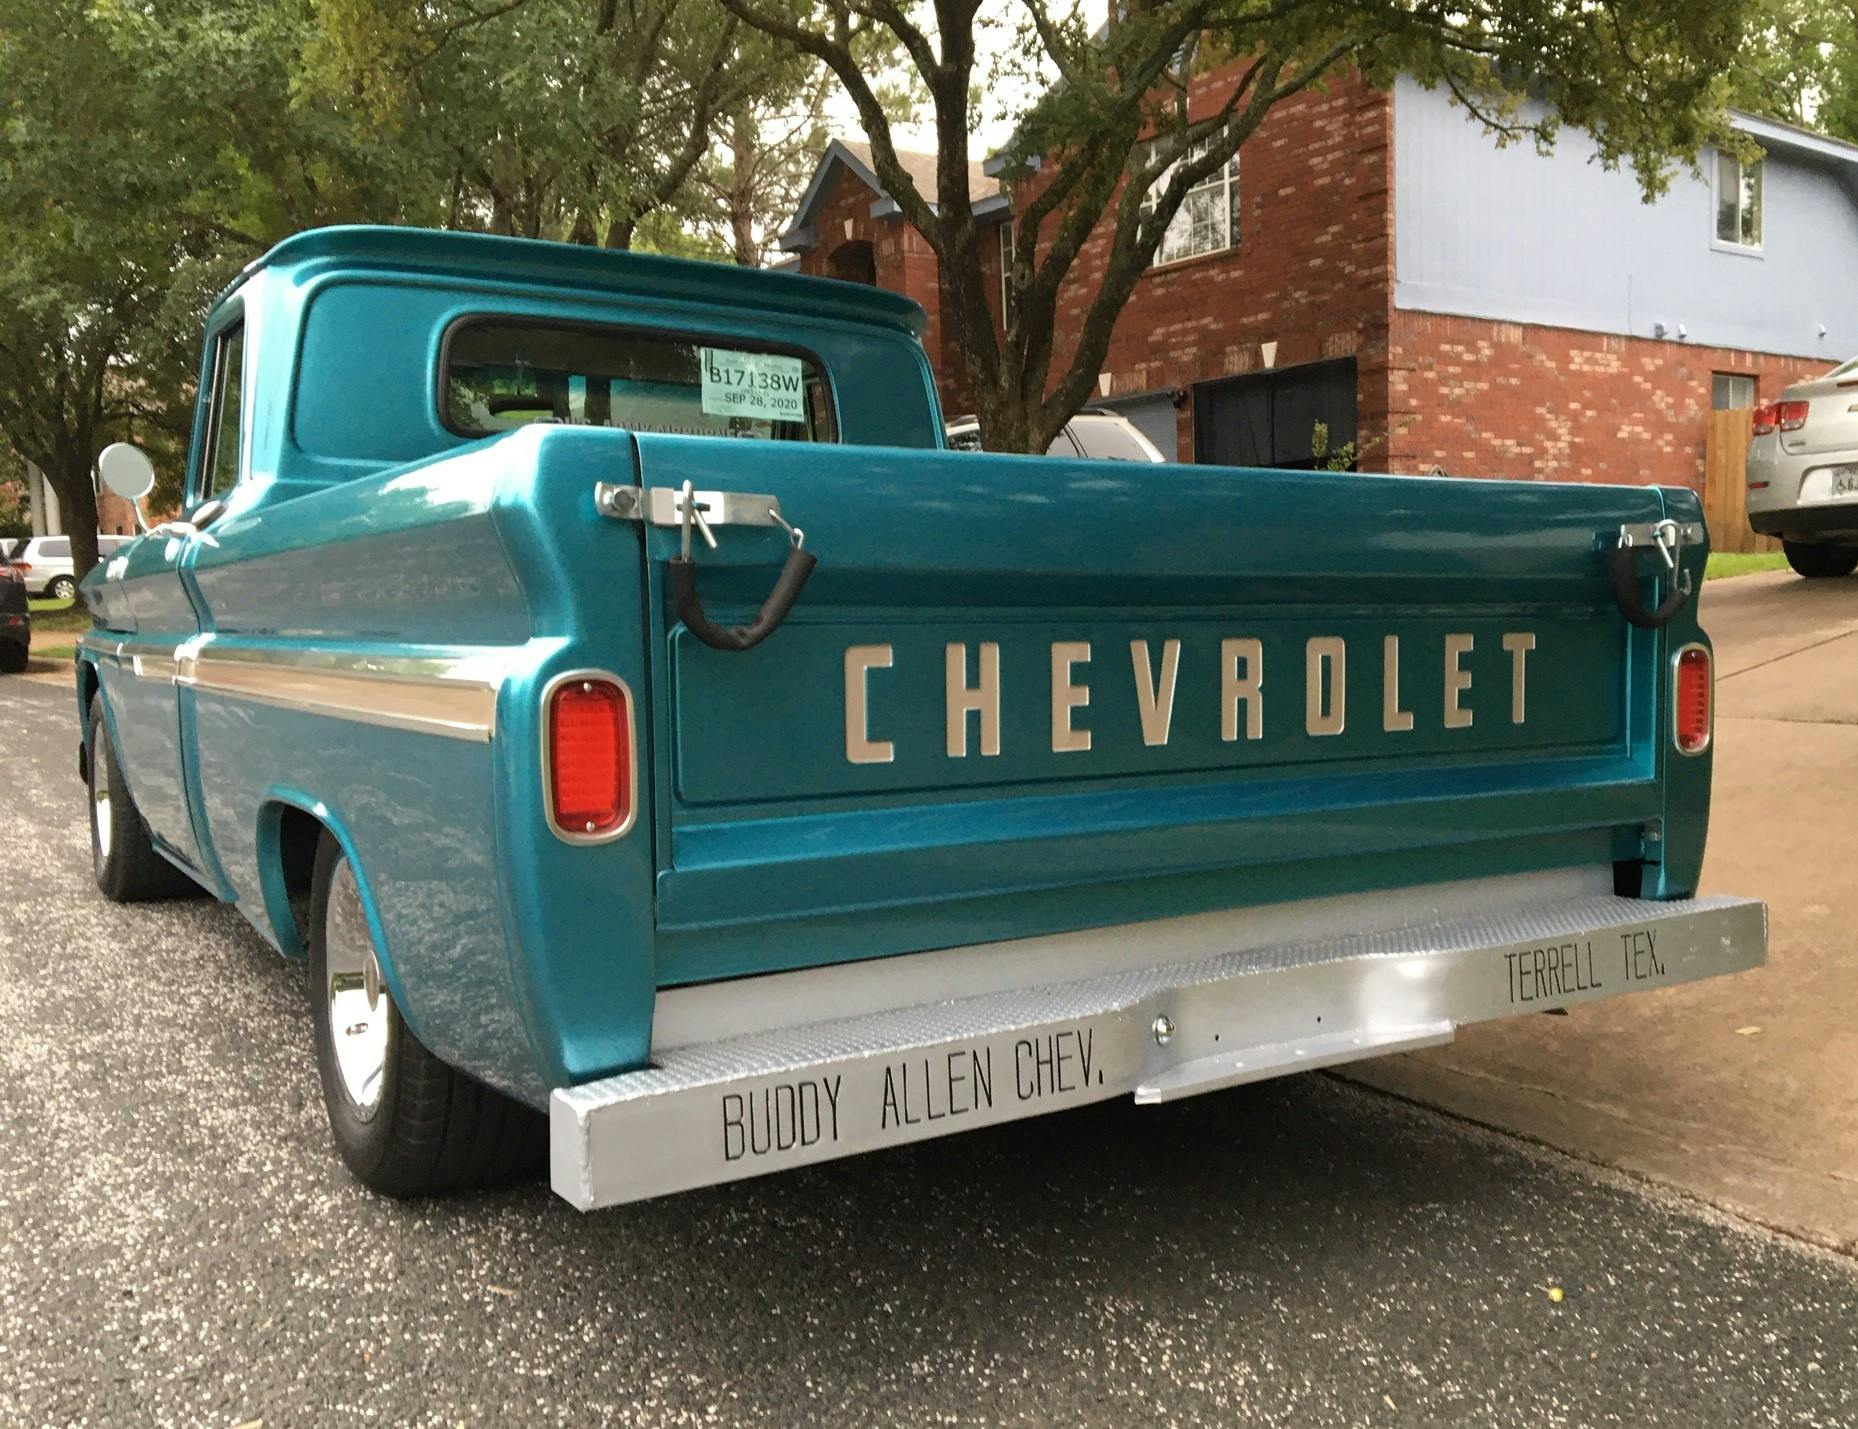 Buddy Allen Chevrolet - 1965 C10 at home - Full rear end